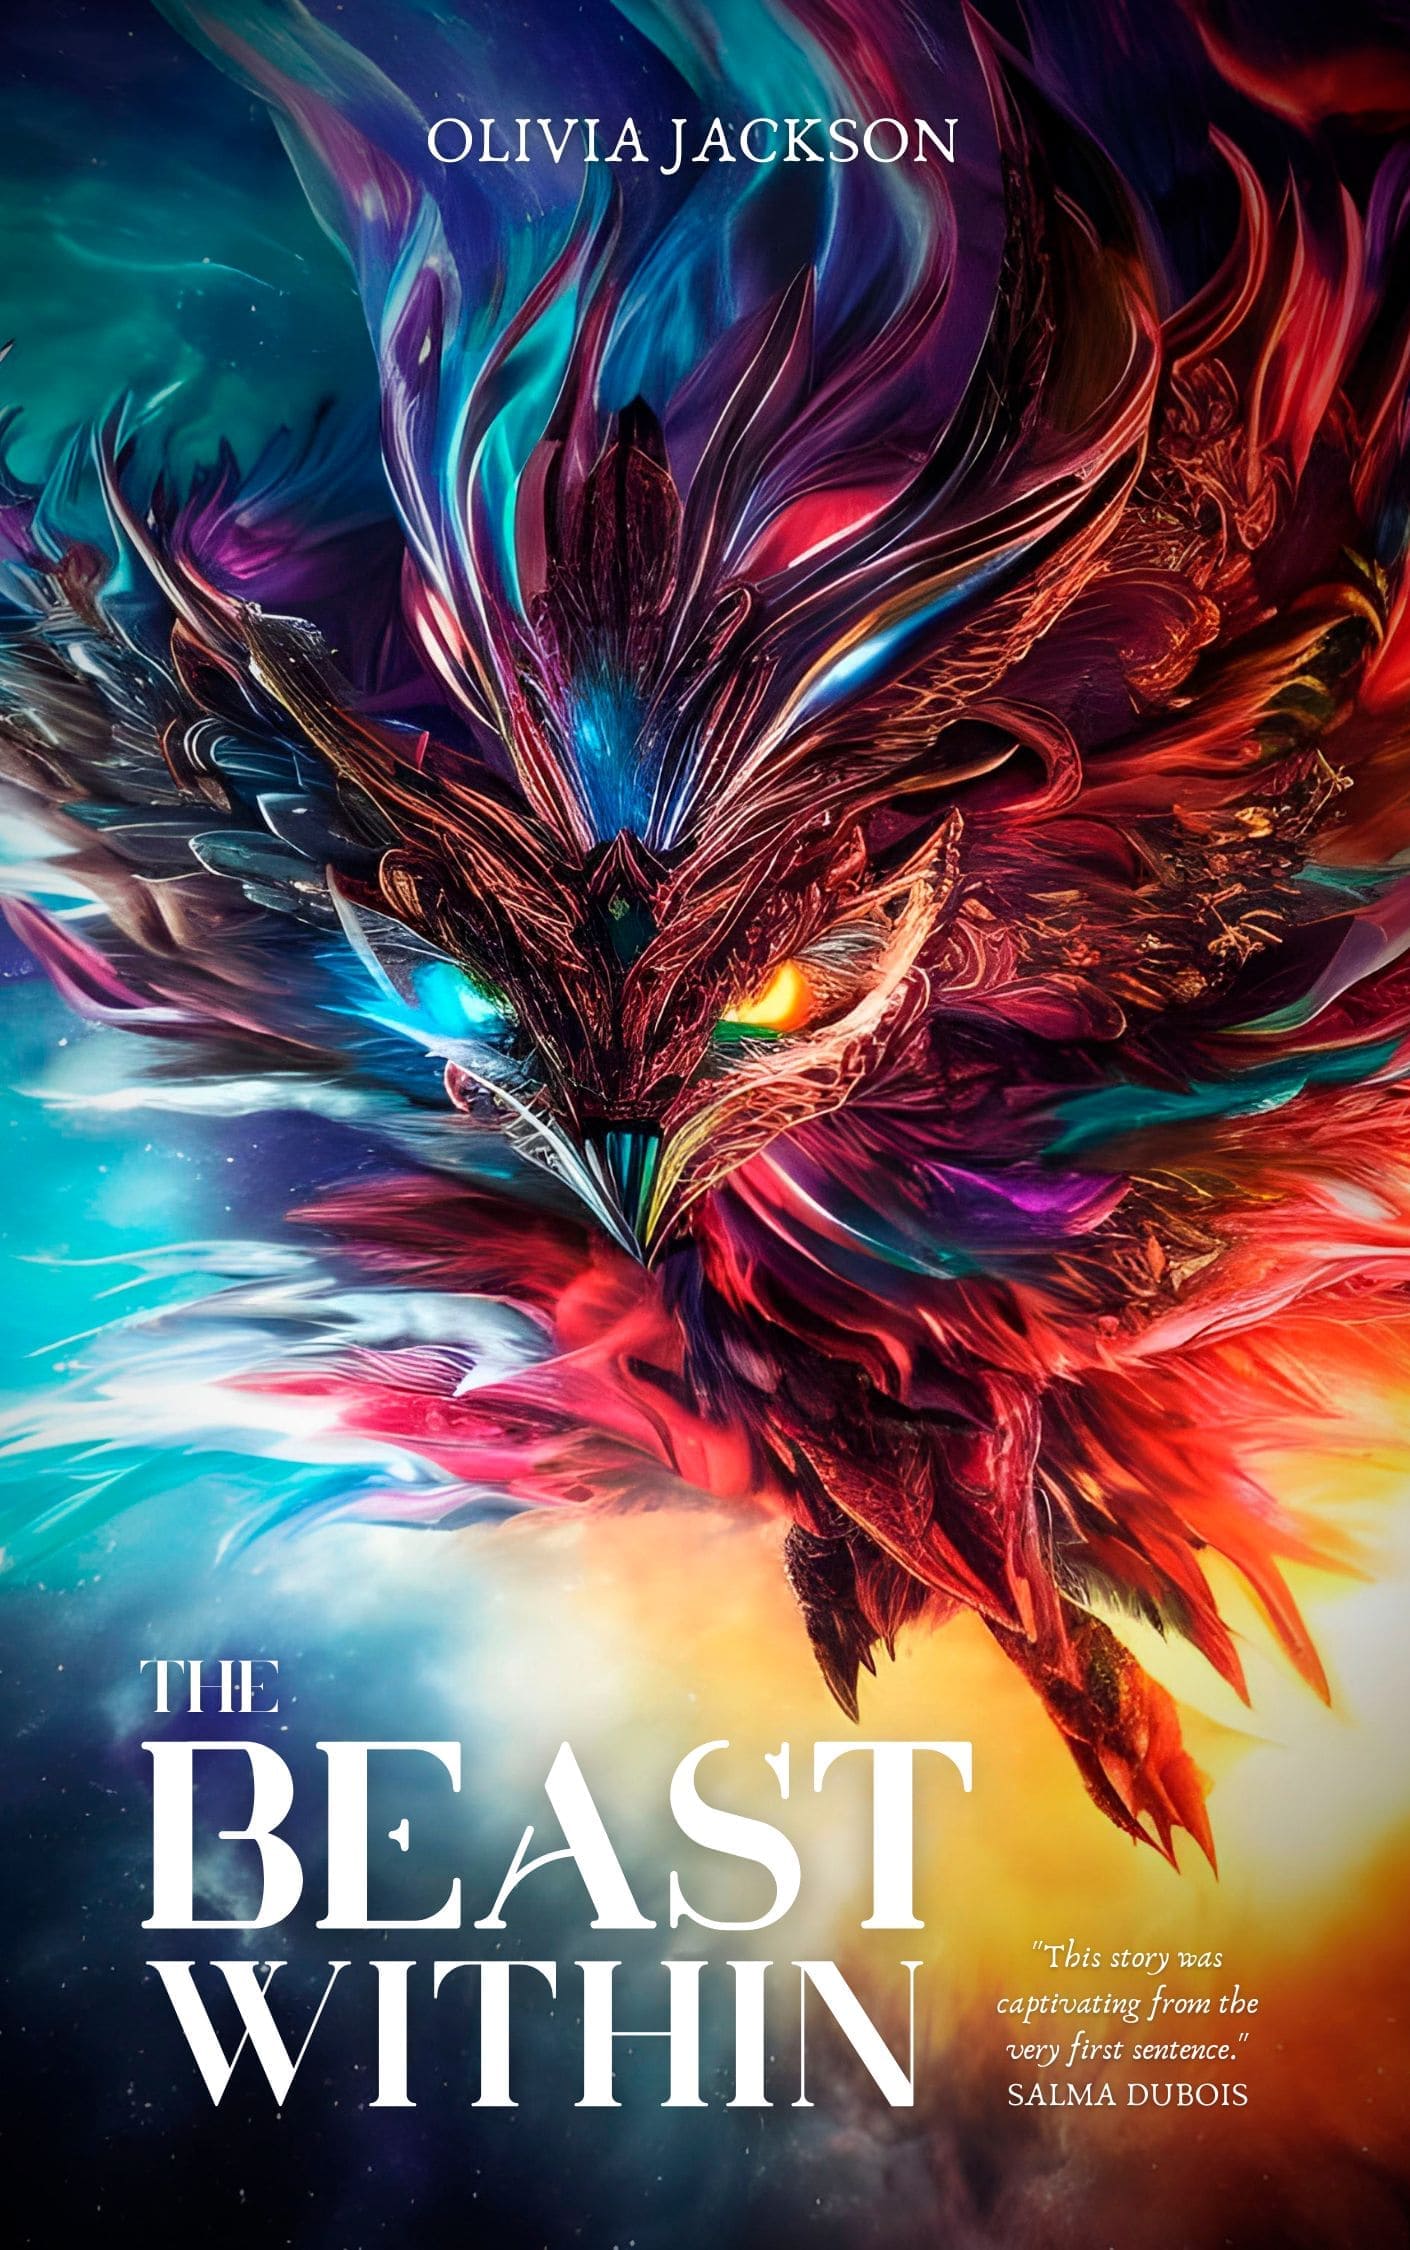 The Beast Within by Cleval Jackson - a captivating artwork showcasing the untamed power and intensity within